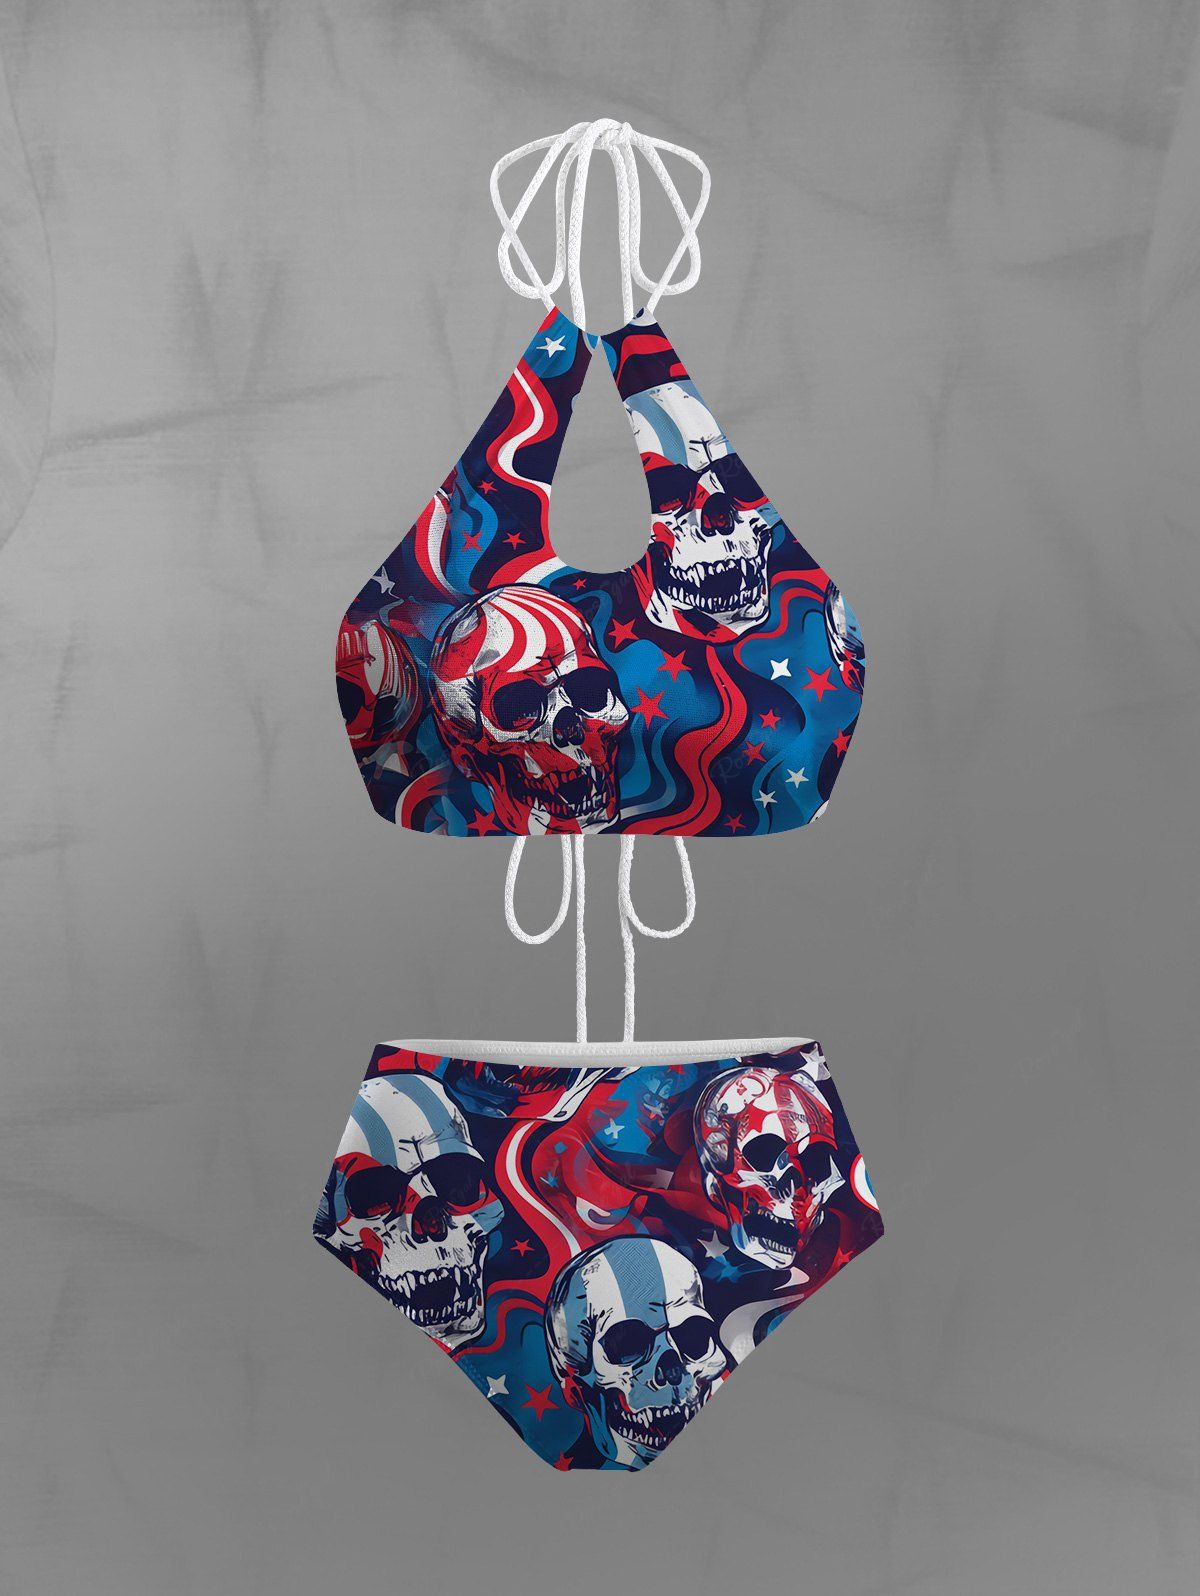 Gothic Patriotic American Flag Skulls Colorful Striped Stars Print Hollow Out Halter Backless Bikini Set